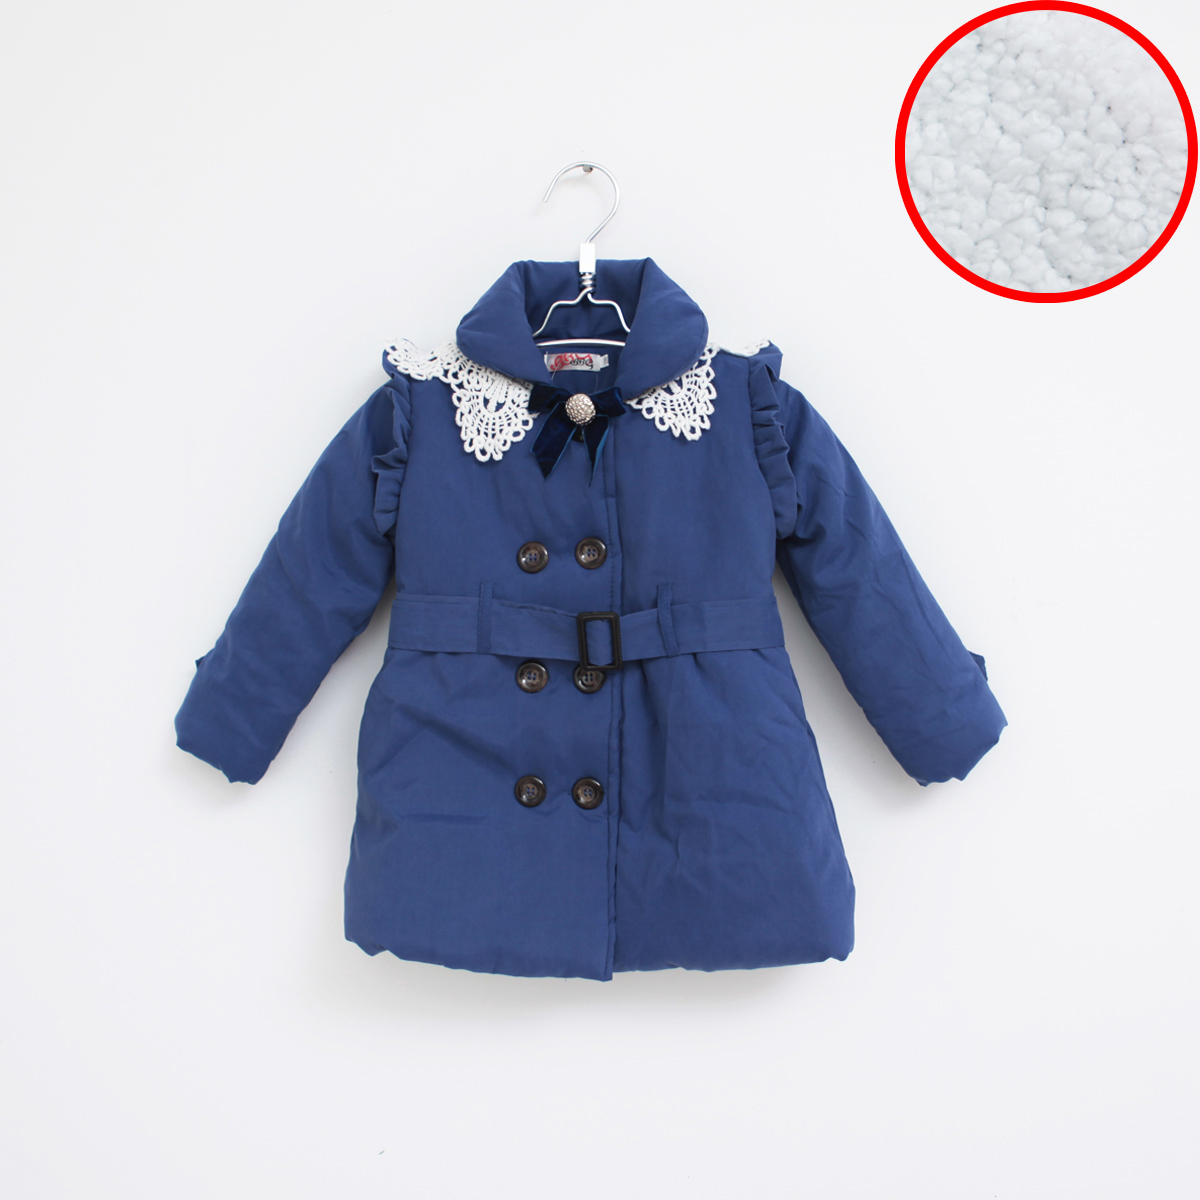 Children's clothing 2012 winter female child wadded jacket plus velvet thickening baby laciness bow child trench